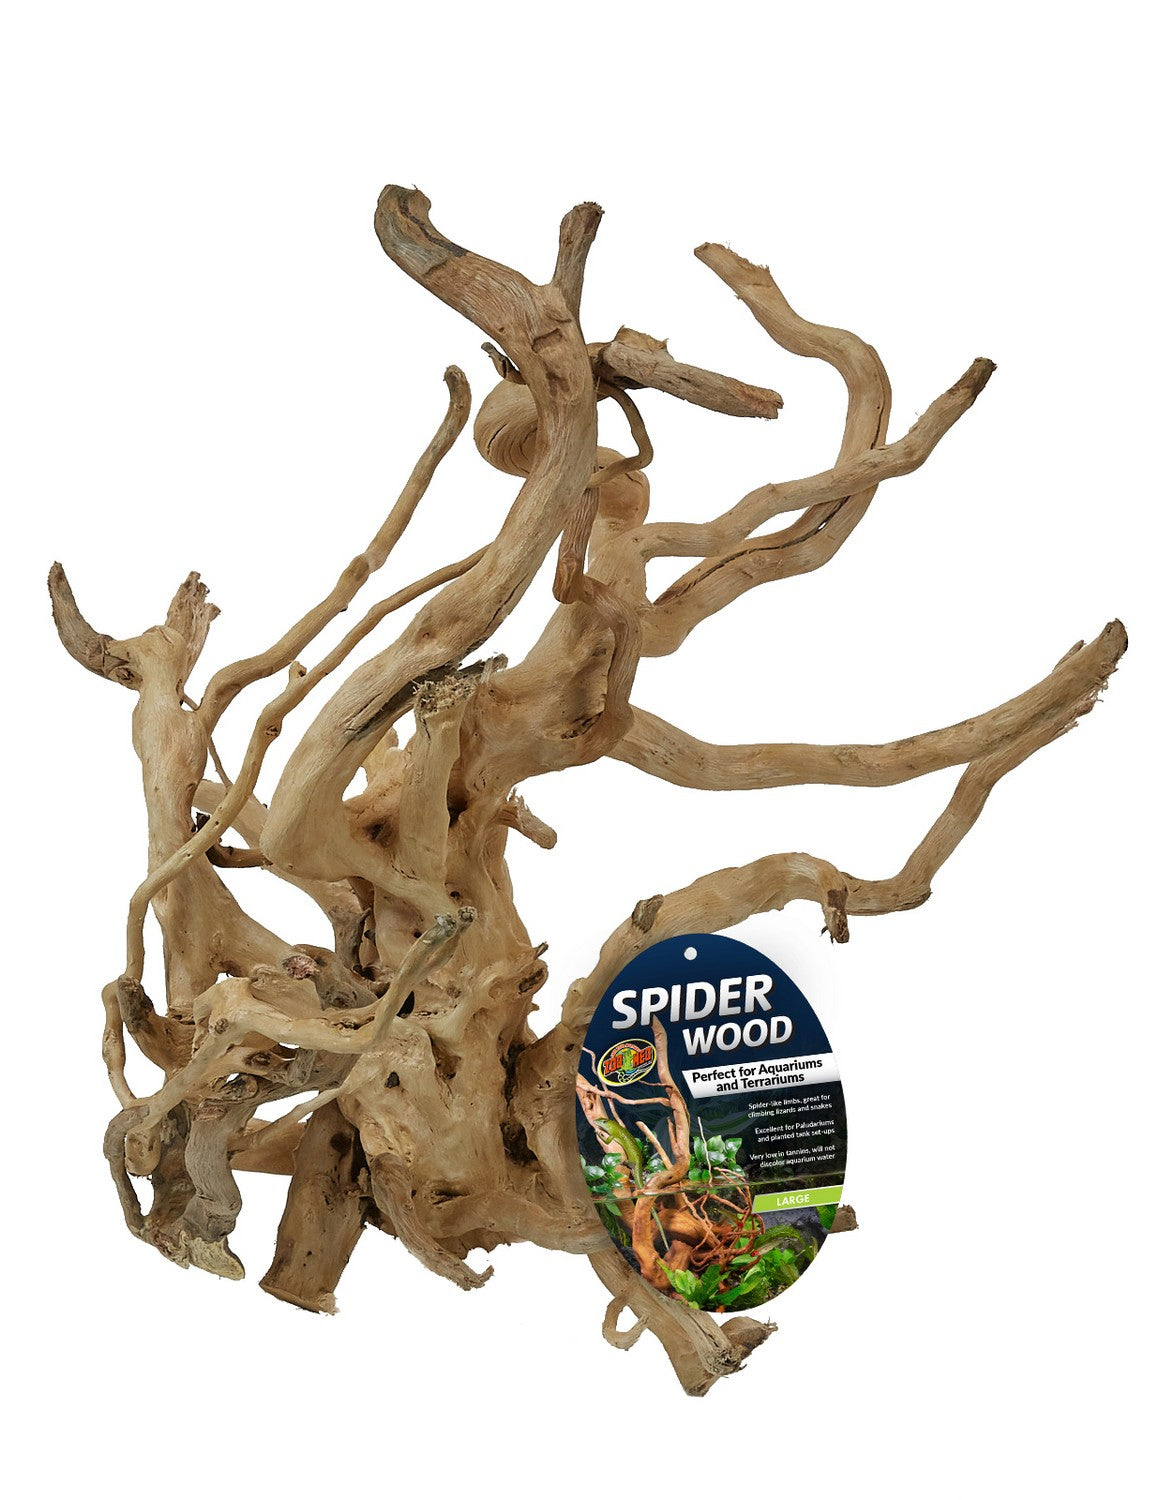 Zoo Med Spider Wood for Aquariums and Terrariums Aquariums For Beginners